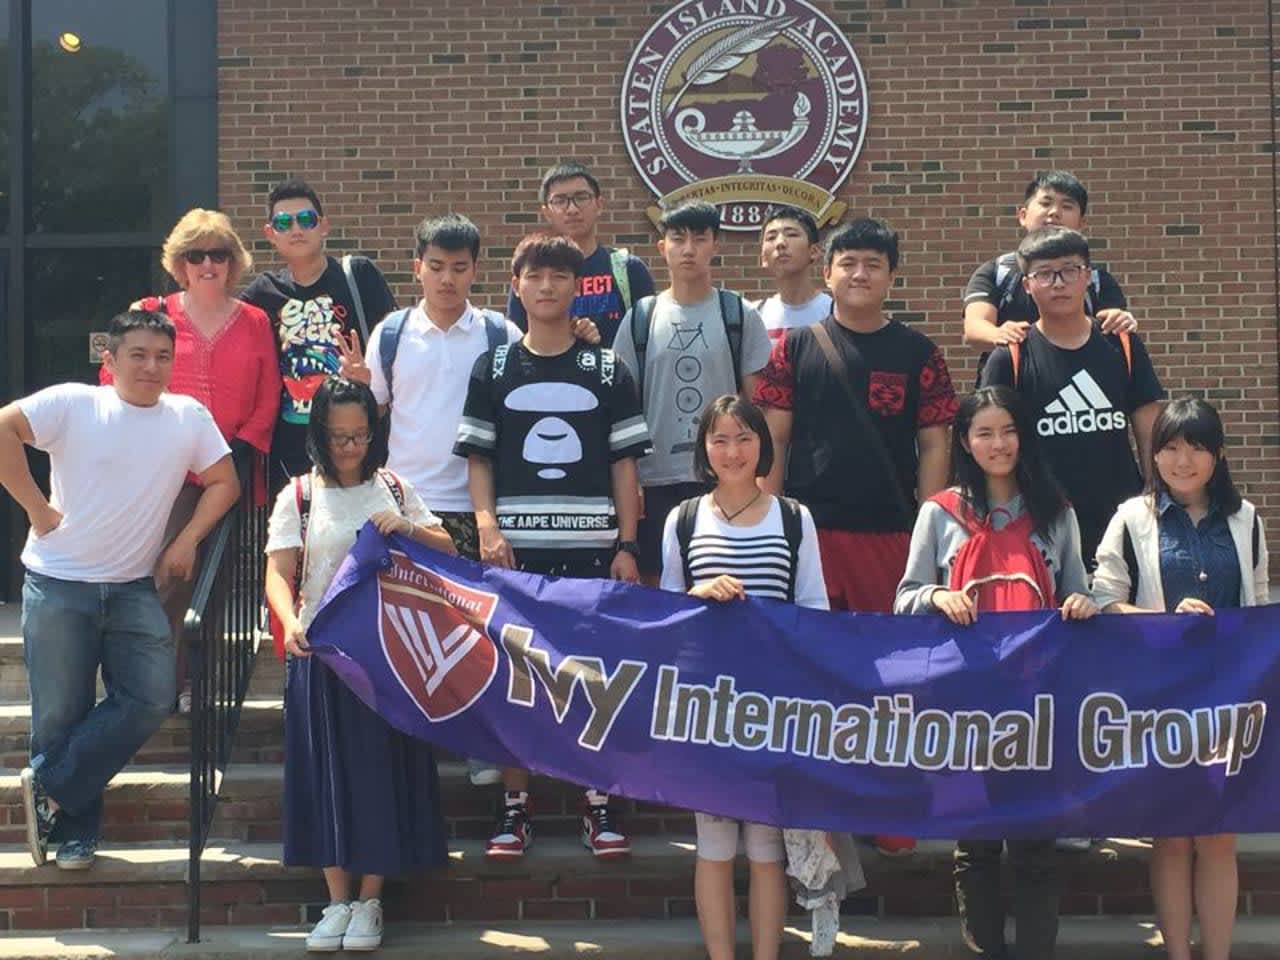 Ivy International finds host families for international students around the world.